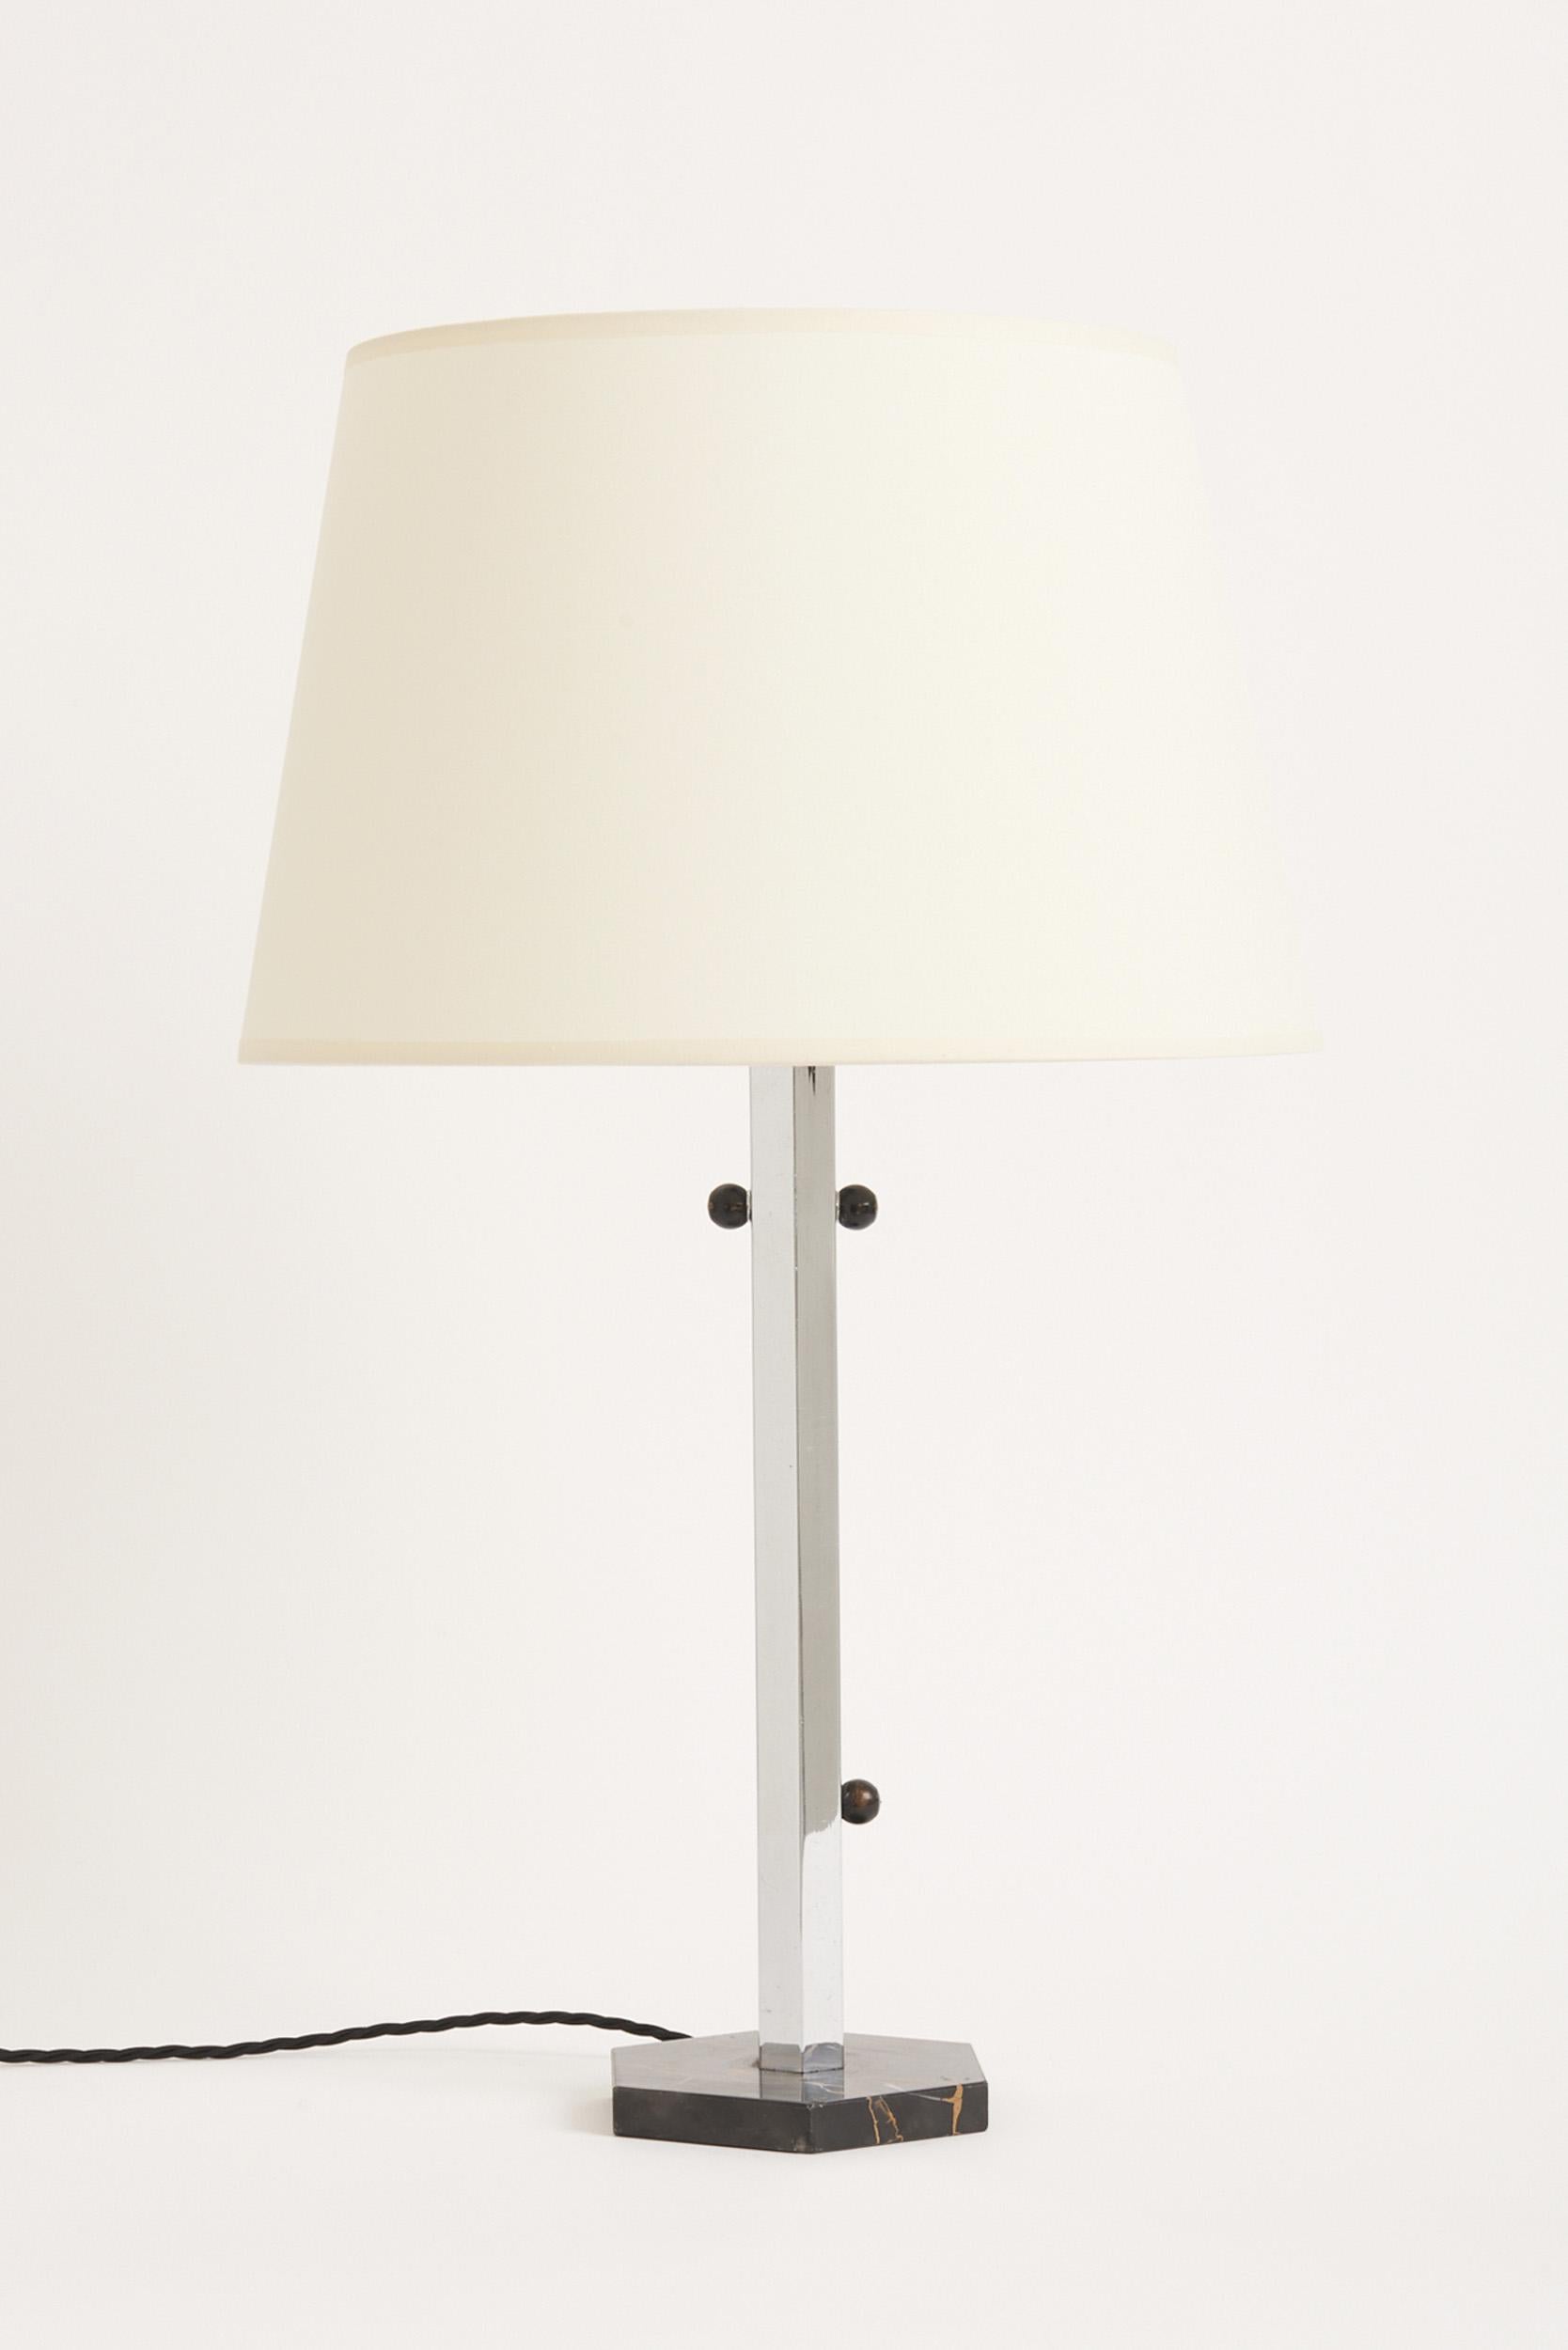 An Art Deco nickel and Portoro marble table lamp.
France, Circa 1930.
With the shade: 64 cm high by 36 cm diameter.
Lamp base only: 47 cm high by 16 cm diameter.